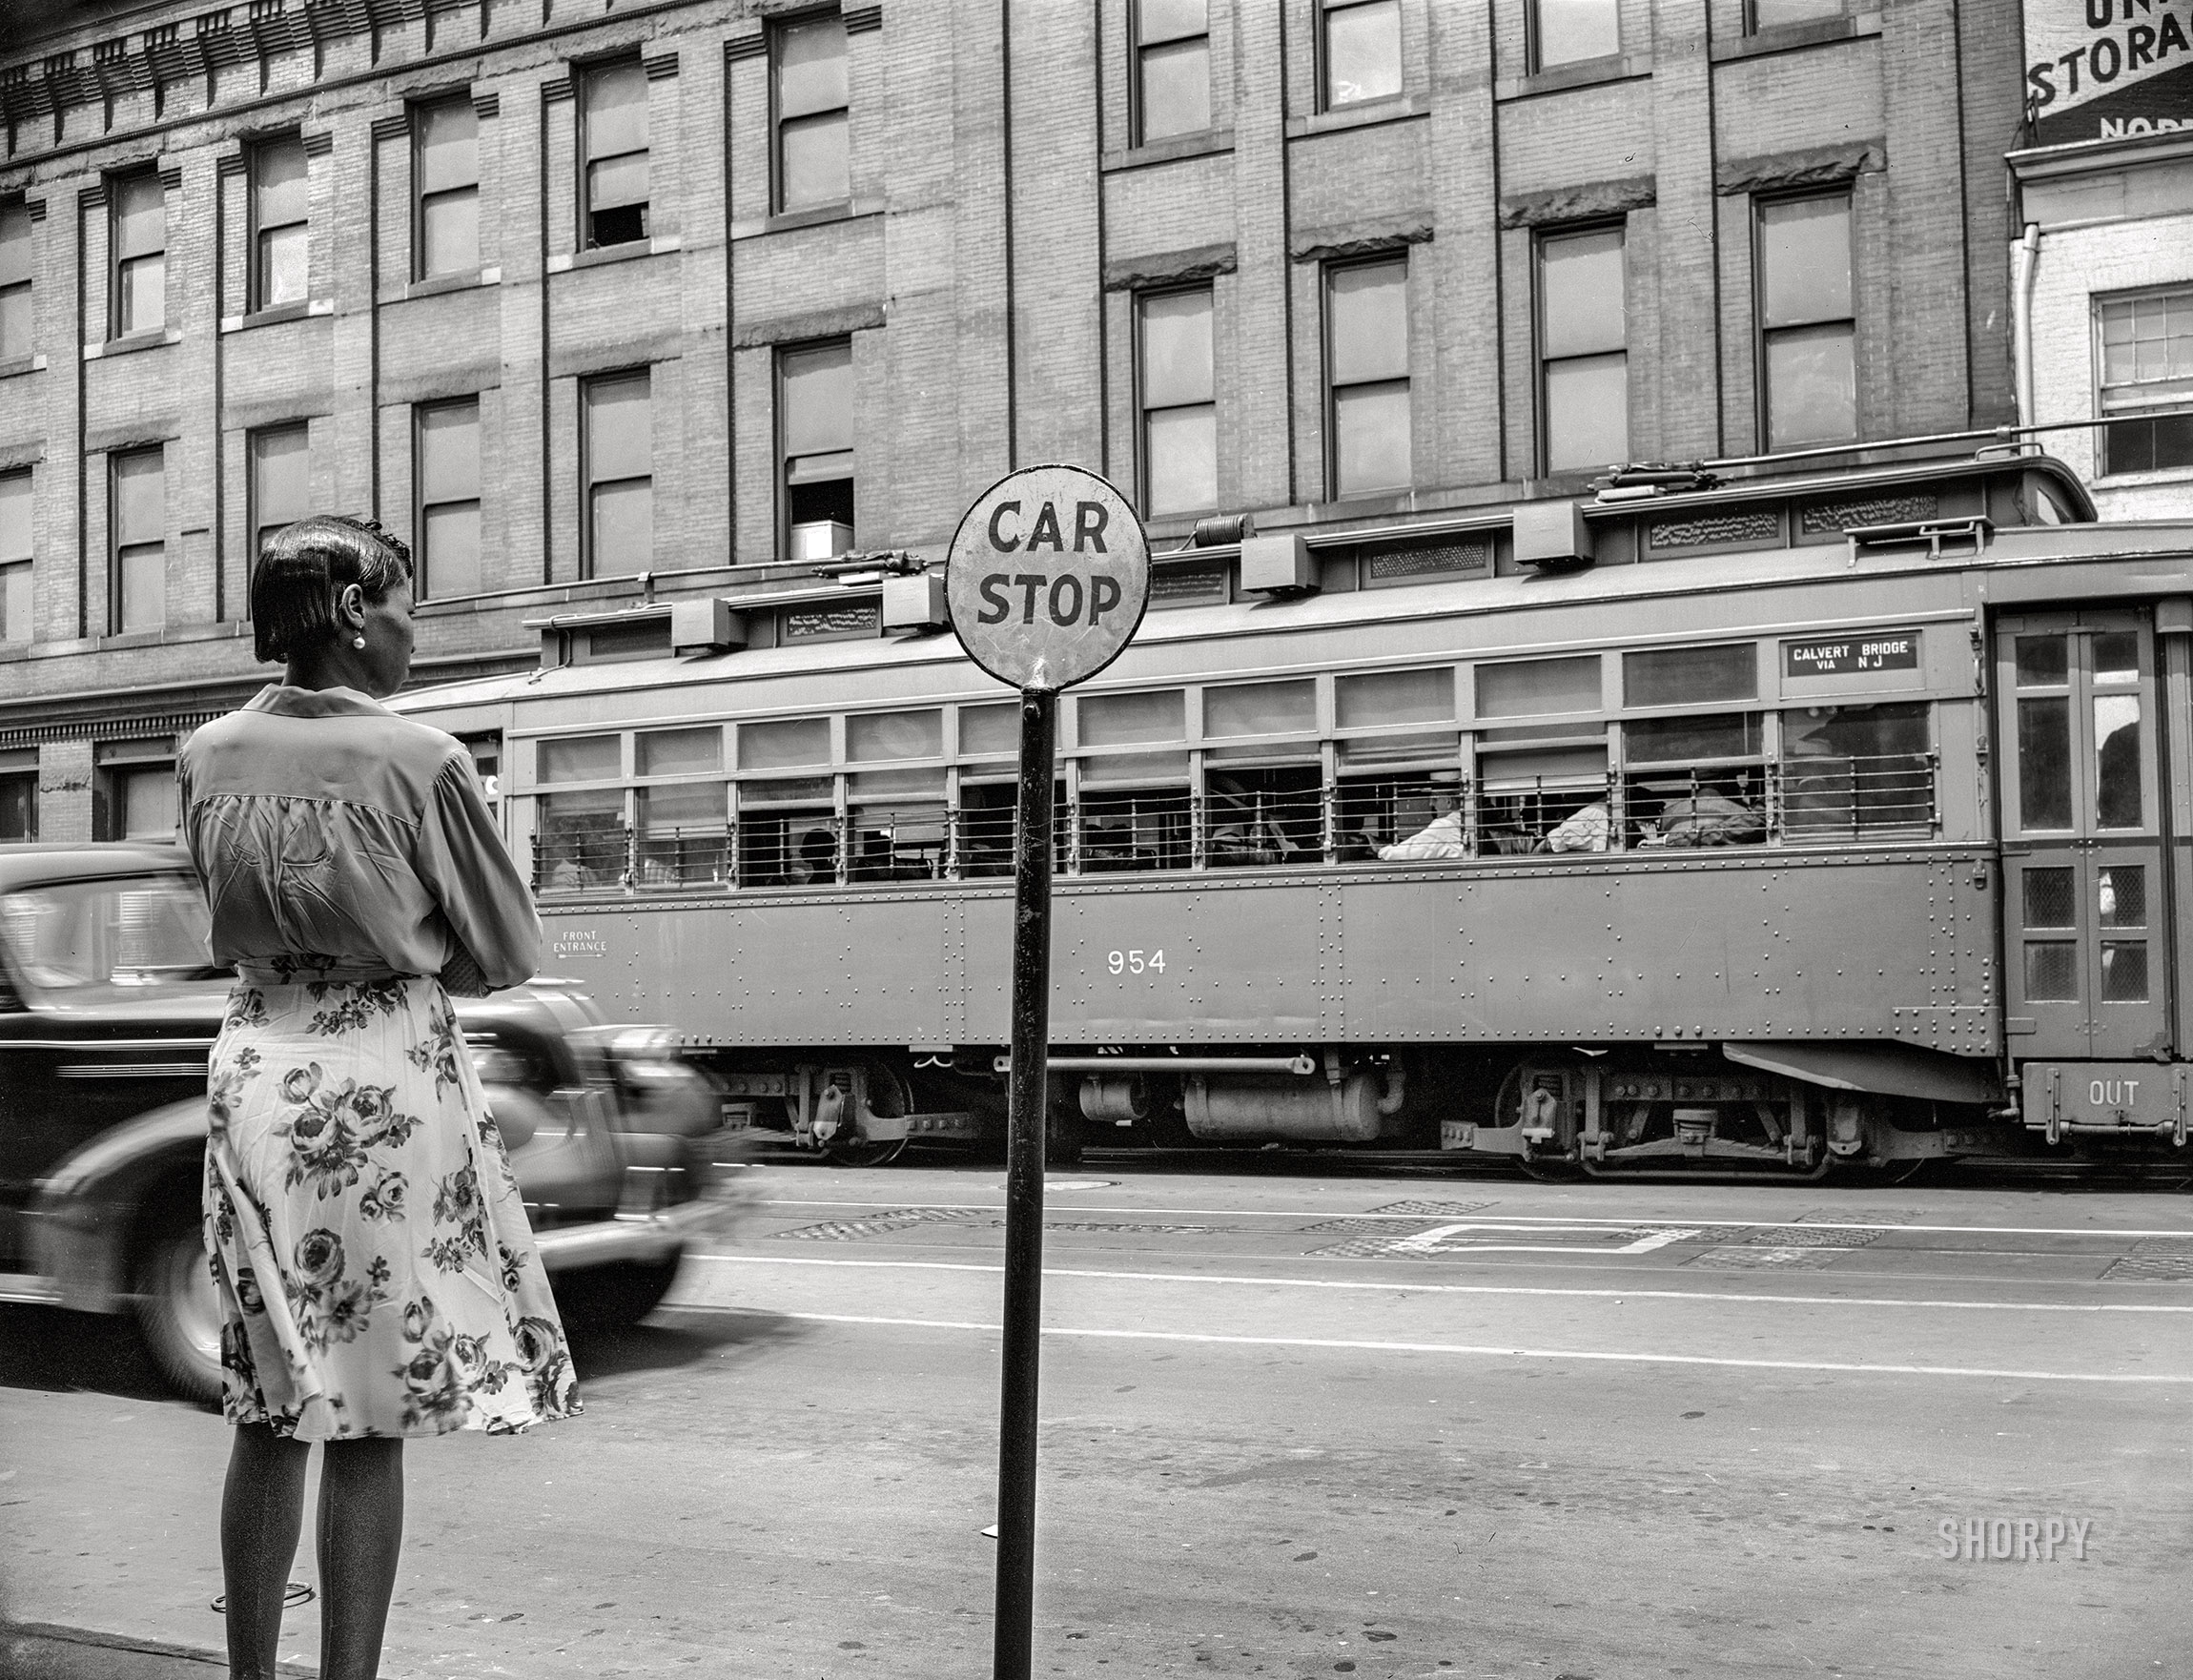 August 1942. Washington, D.C. "Streetcar at 7th Street and Florida Avenue N.W." 4x5 inch acetate negative by Gordon Parks for the Farm Security Administration. View full size.